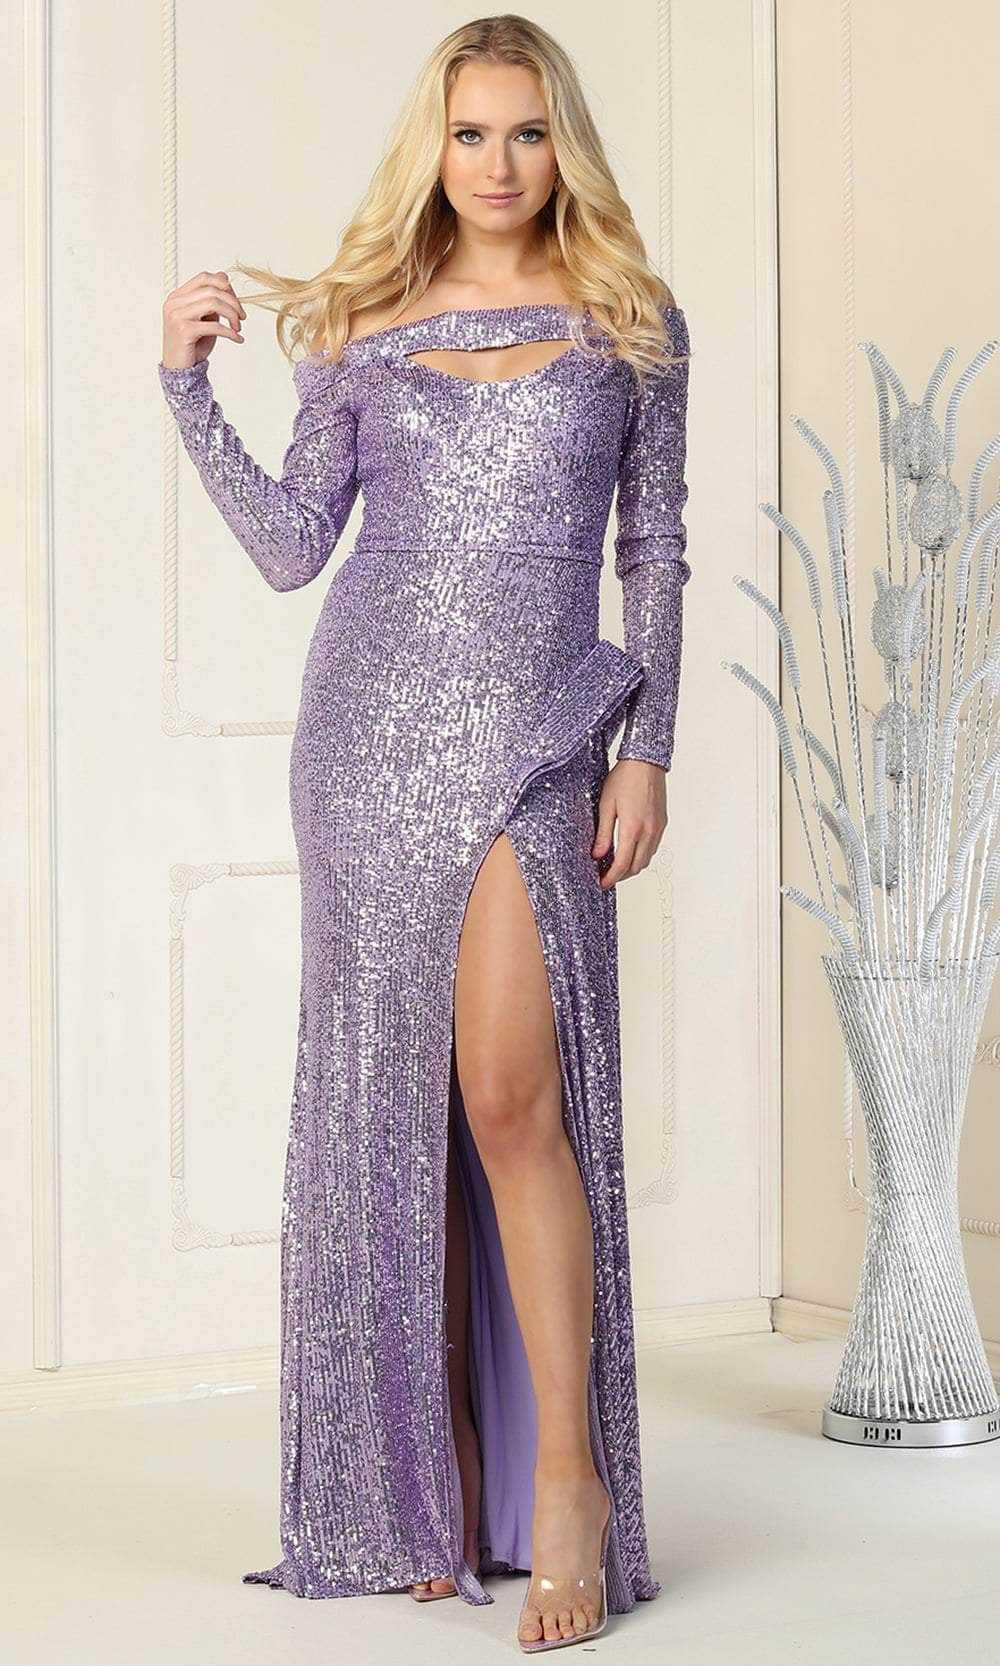 May Queen, May Queen RQ7890 - Cutout Neckline Fully Sequined Evening Gown